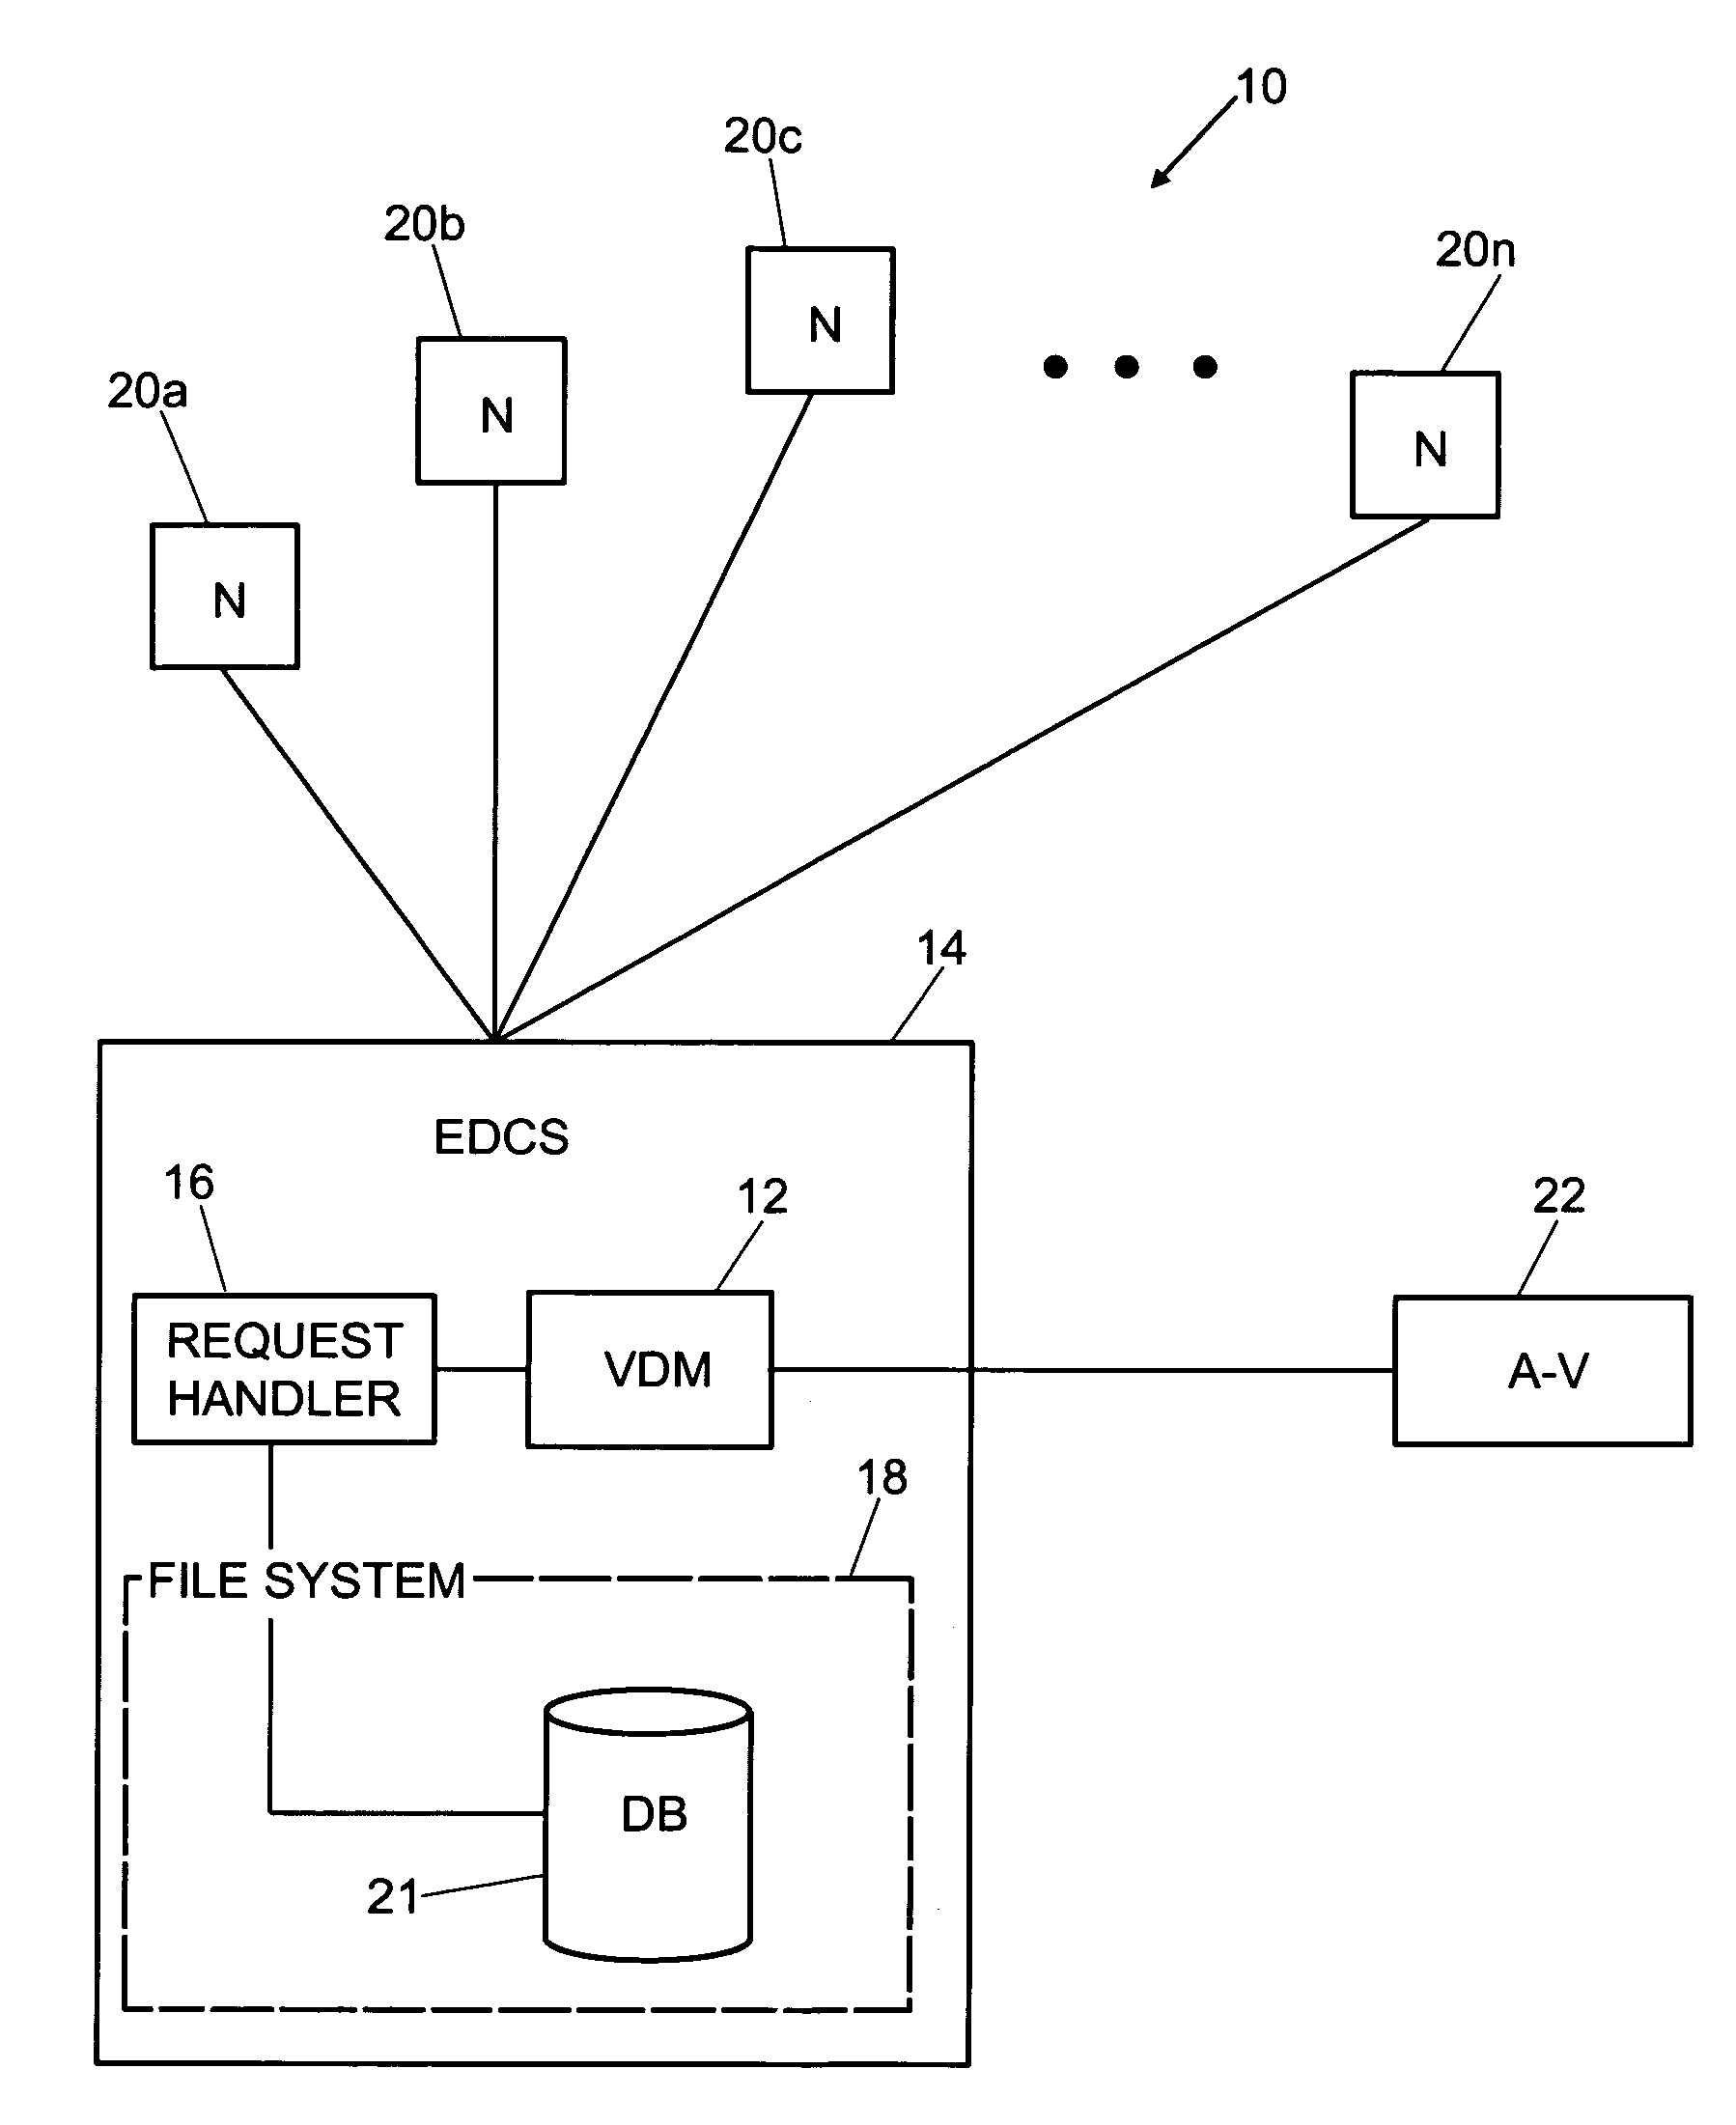 Virus detection and removal system and method for network-based systems